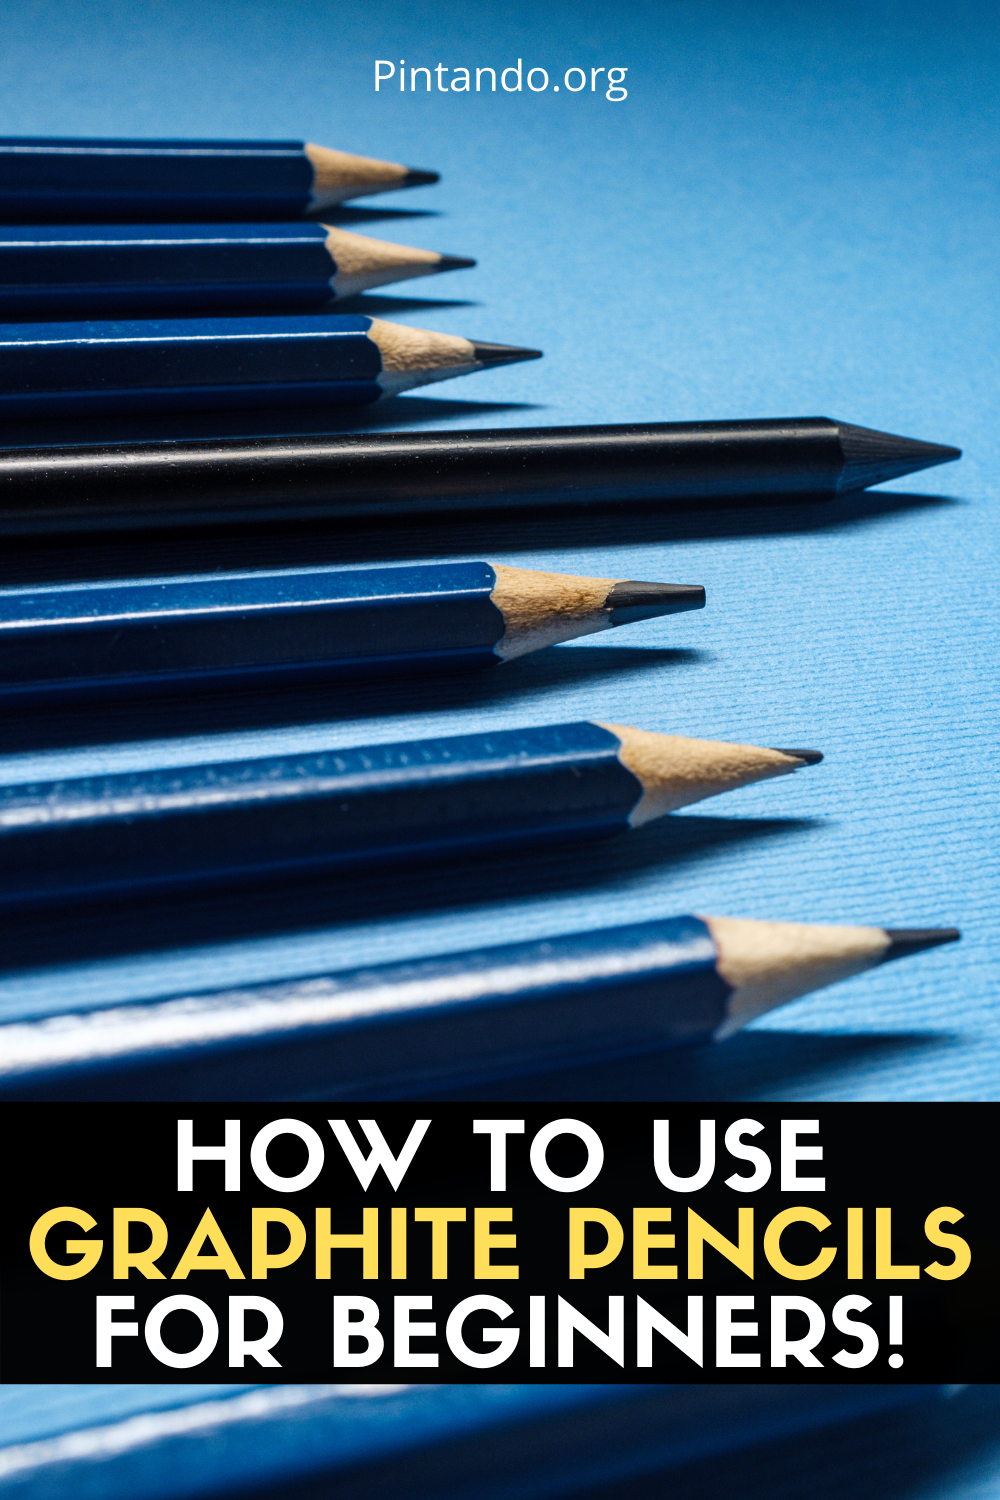 HOW TO USE GRAPHITE PENCILS FOR BEGINNERS!